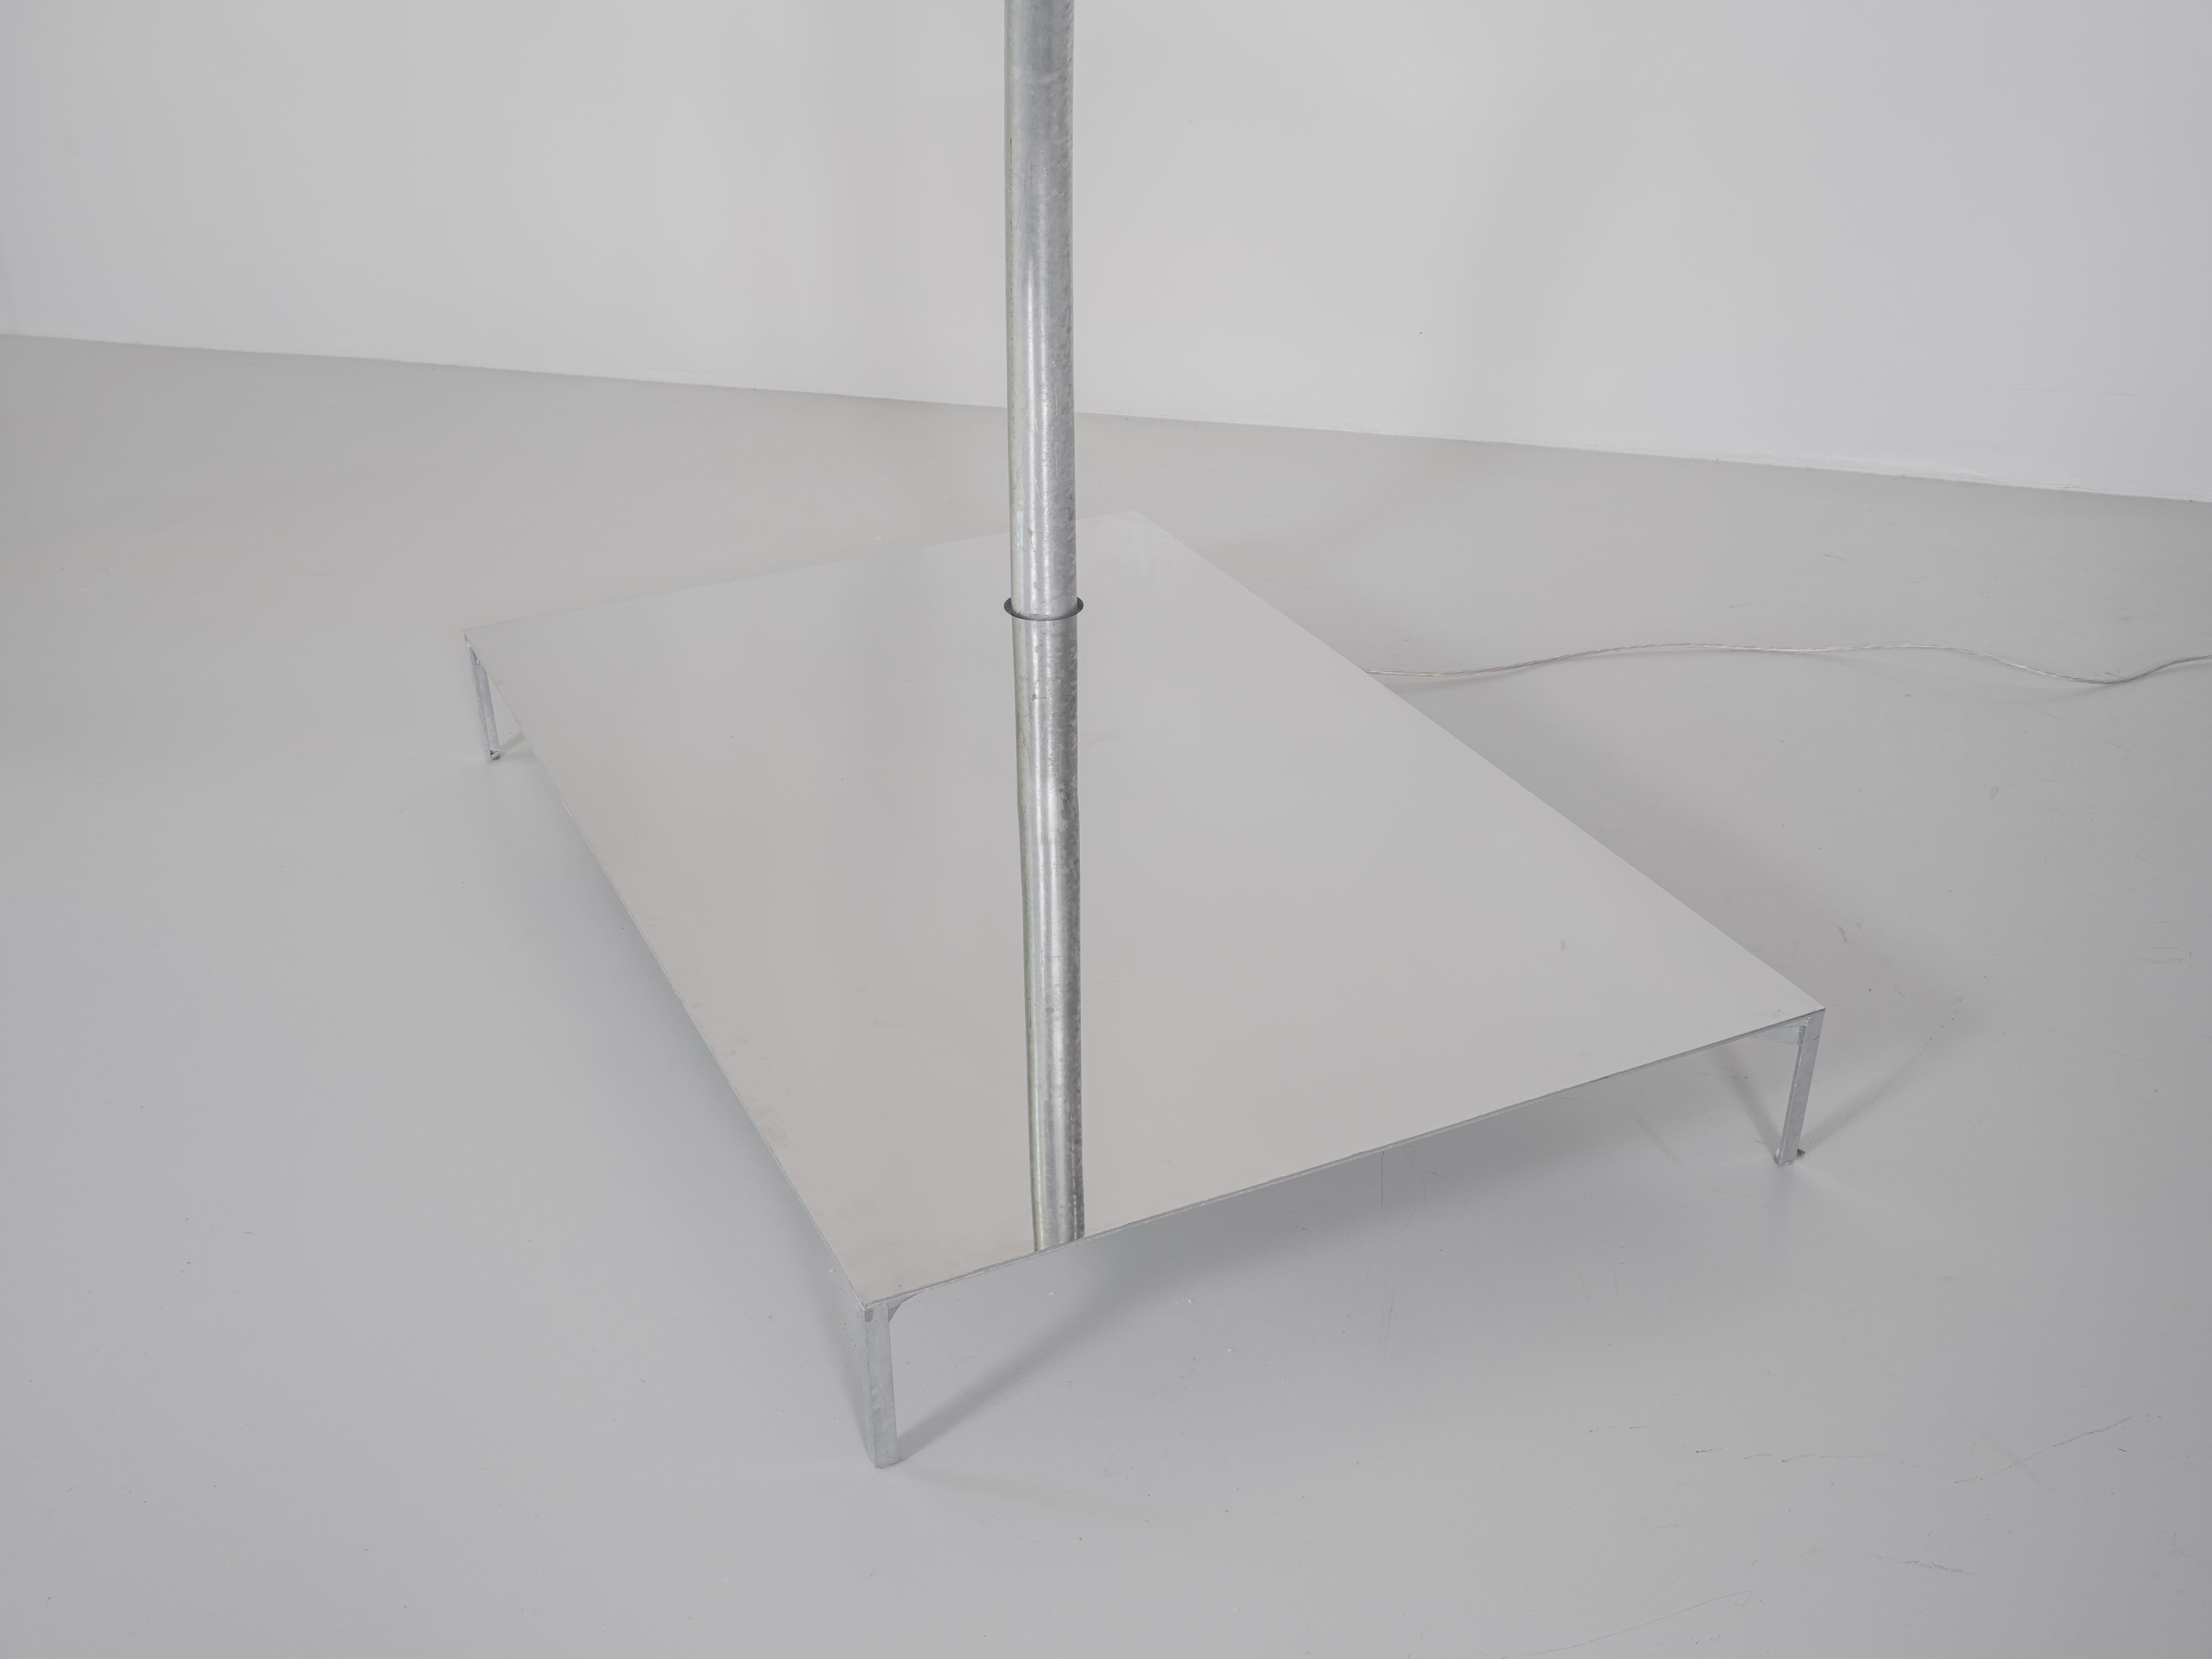 Sam Chermayeff
Streetlight table
From the series “Beasts”
Produced in exclusive for SIDE GALLERY
Manufactured by ERTL und ZULL
Berlin, 2021
Galvanized steel, mirror
Contemporary Design

Measurements
261,4 cm x 140 cm x 198,1h cm (18 cm